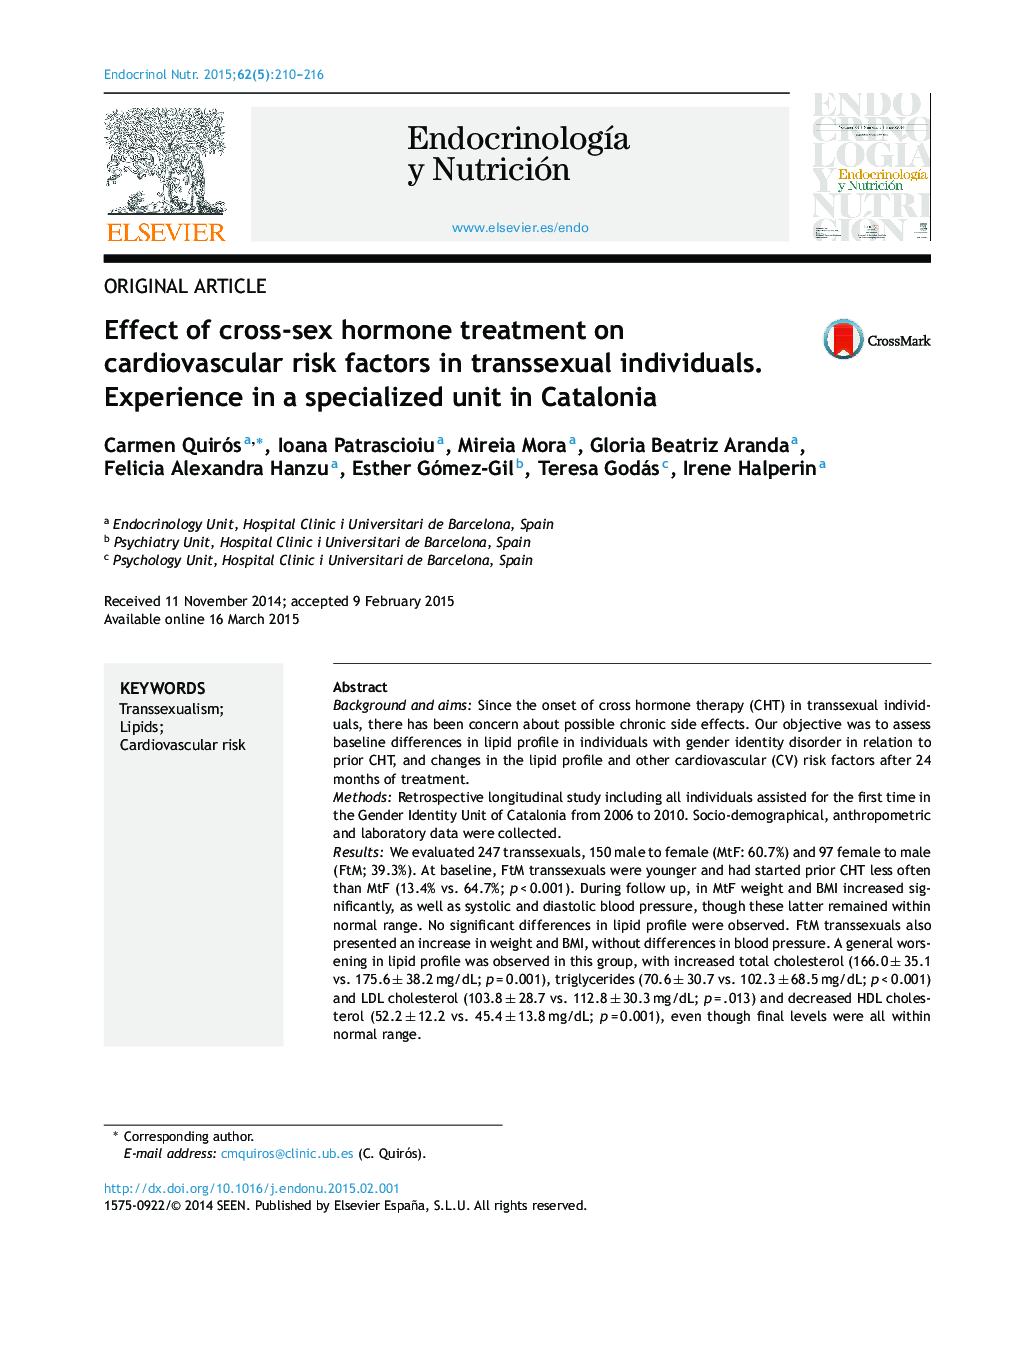 Effect of cross-sex hormone treatment on cardiovascular risk factors in transsexual individuals. Experience in a specialized unit in Catalonia